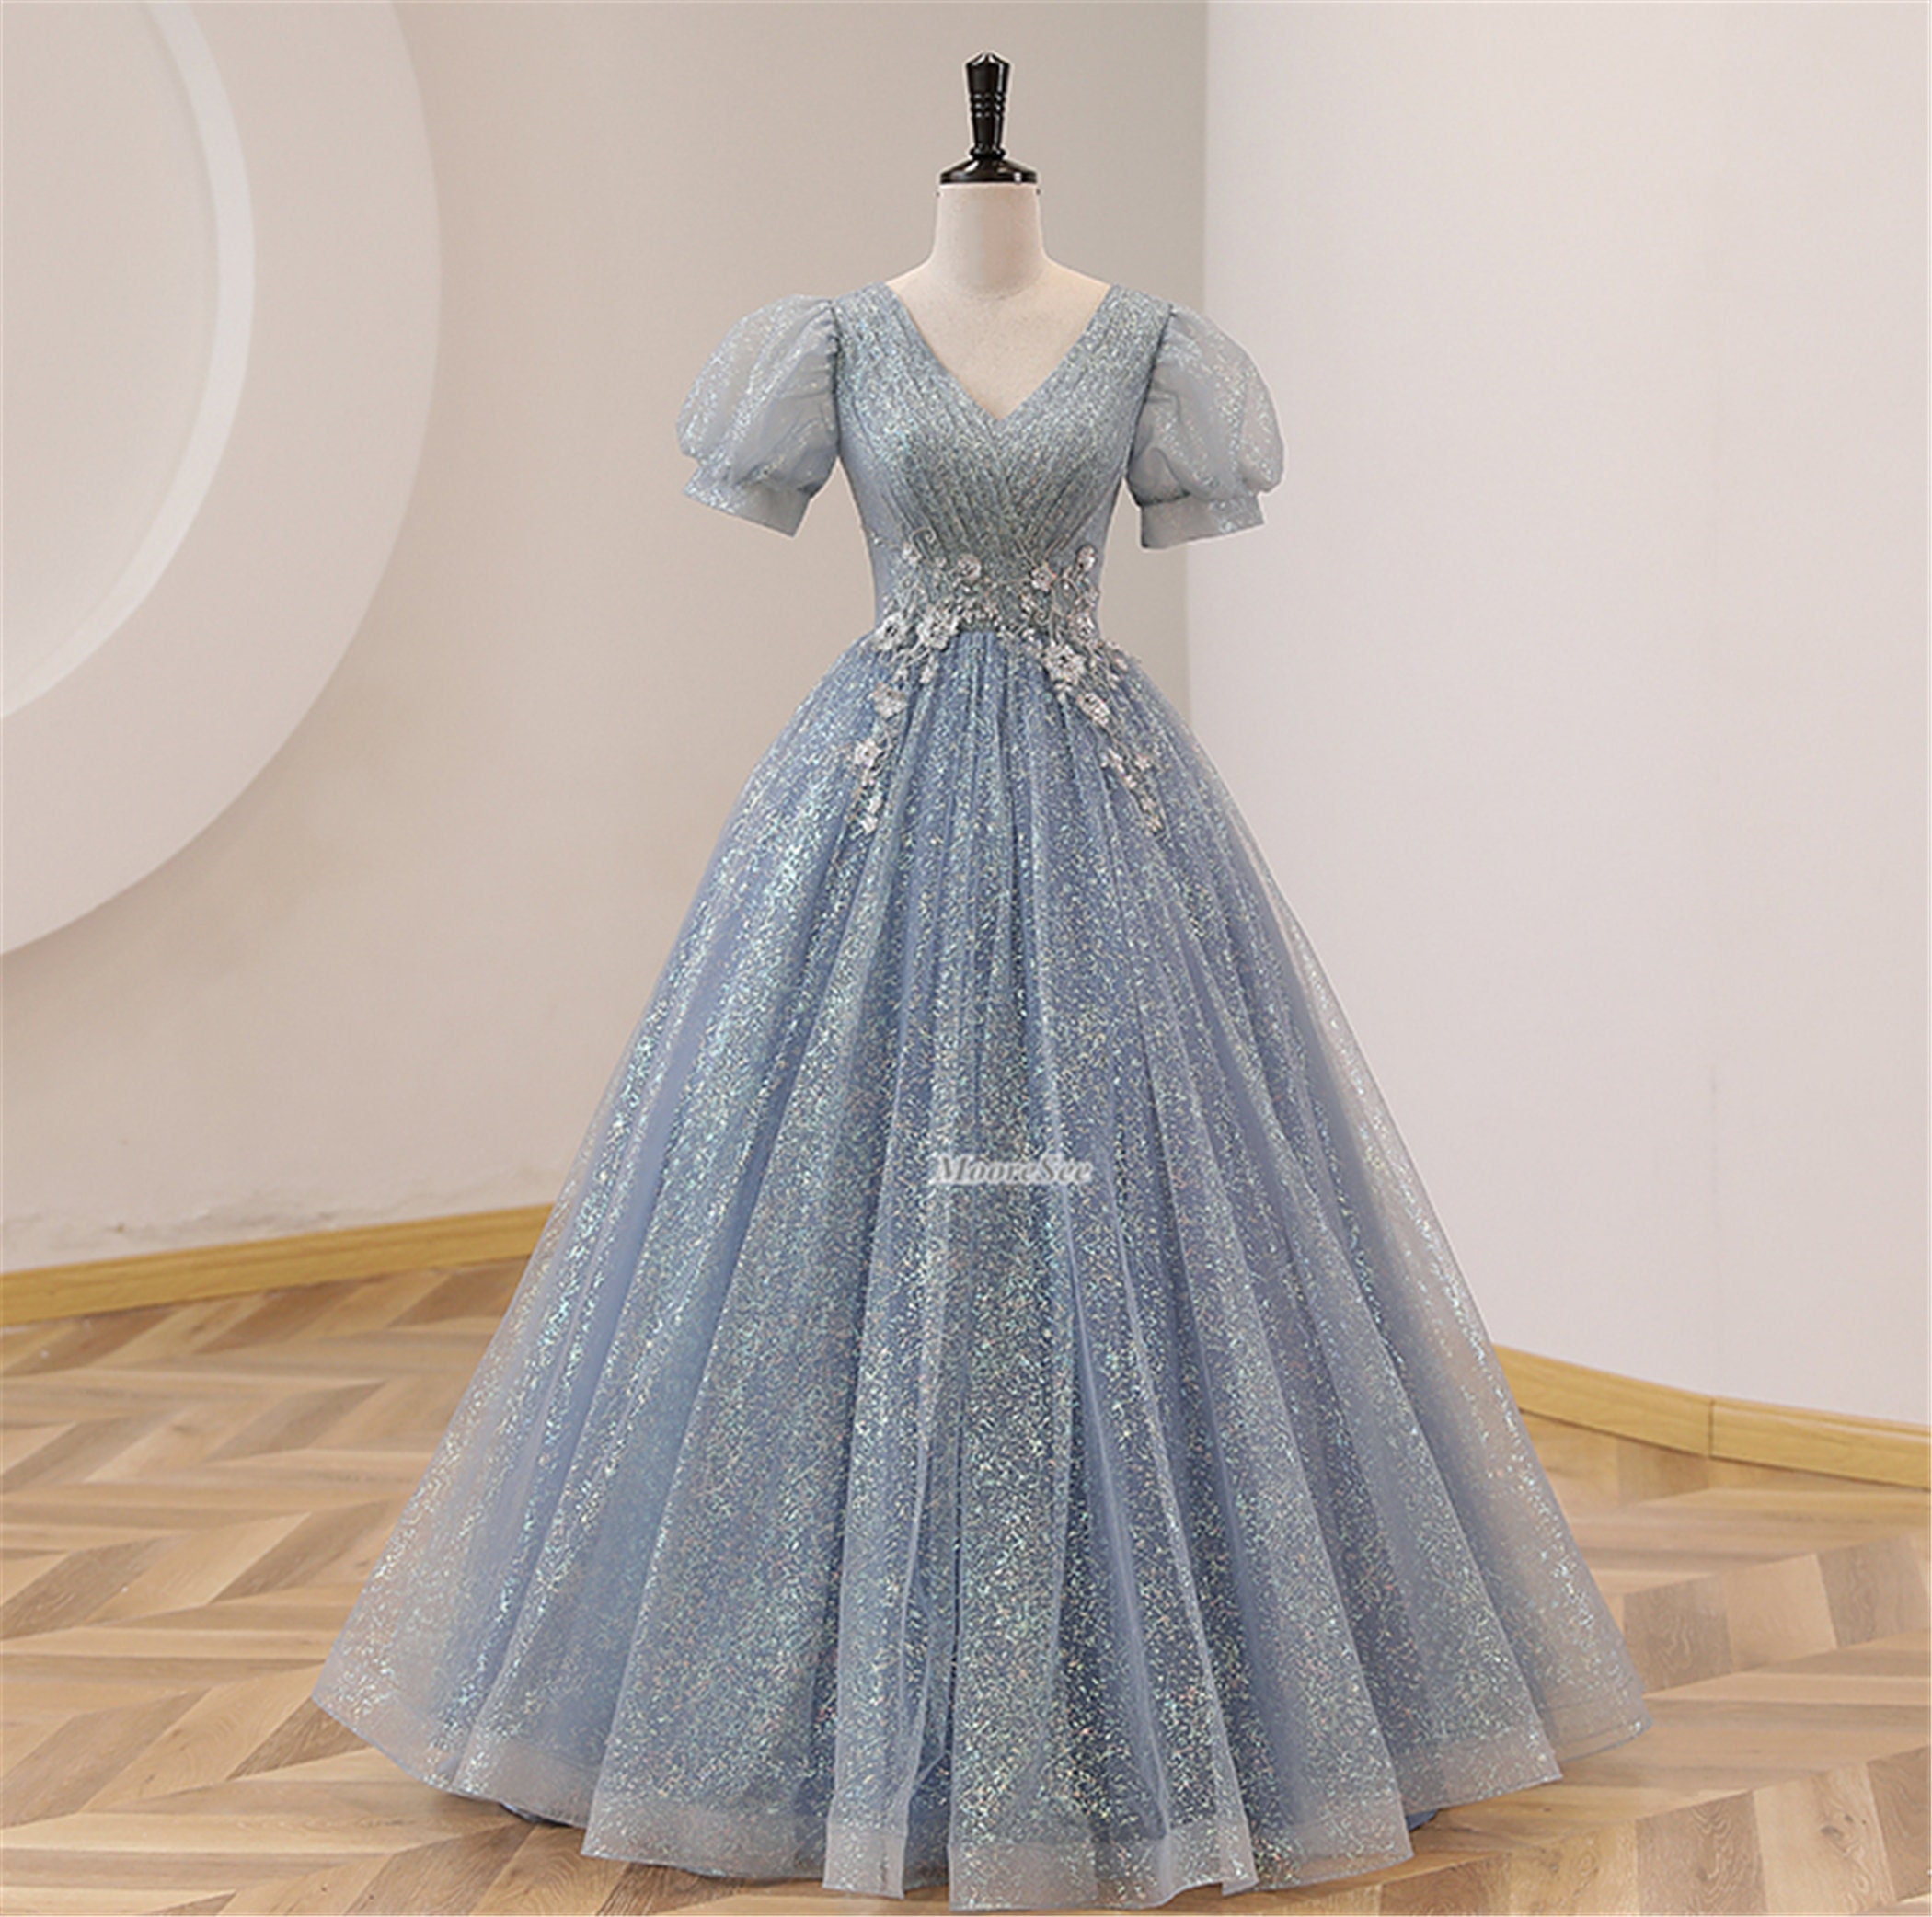 Dolly Gown Fairy Dusty Blue Tulle Floral Lace Boho Prom Dress